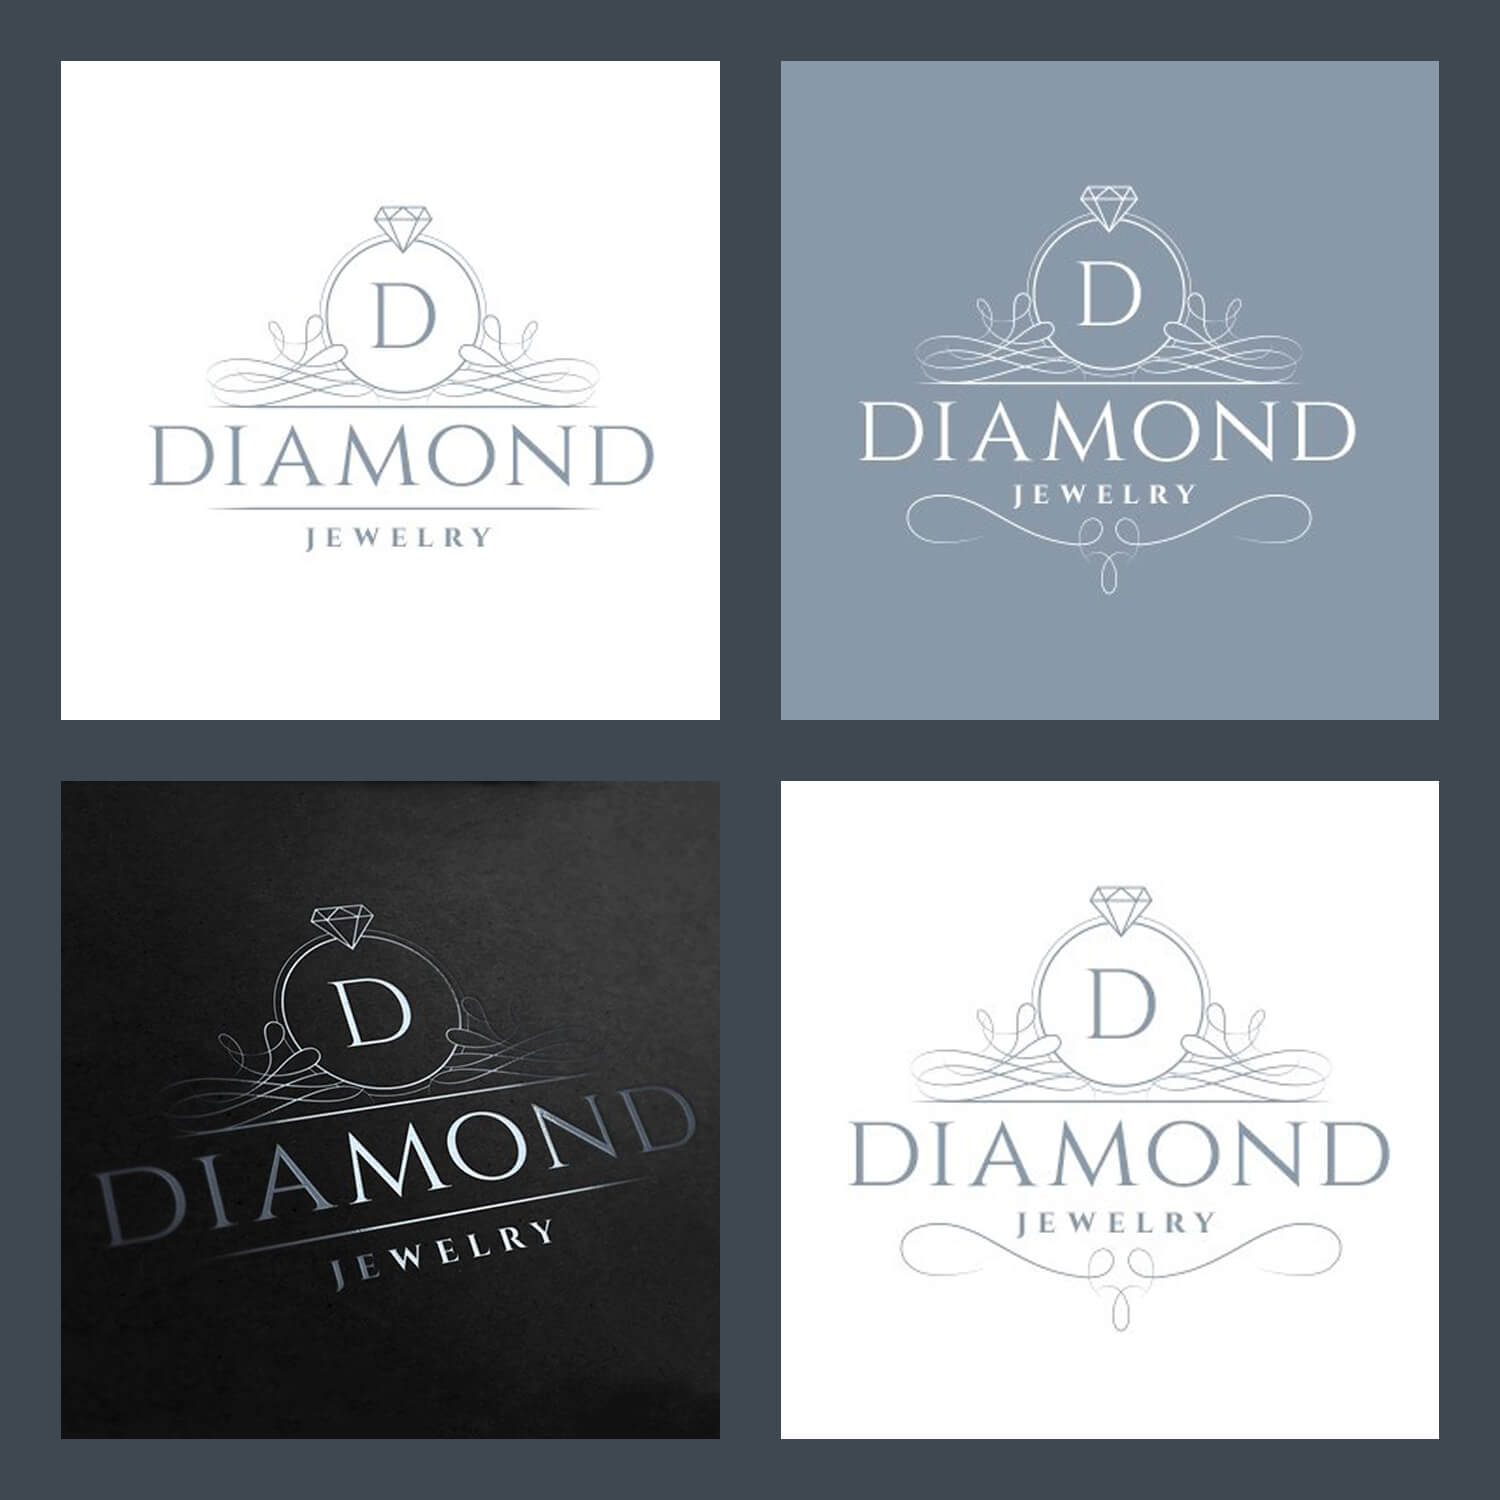 Four diamond jewelry logos in a gray square.